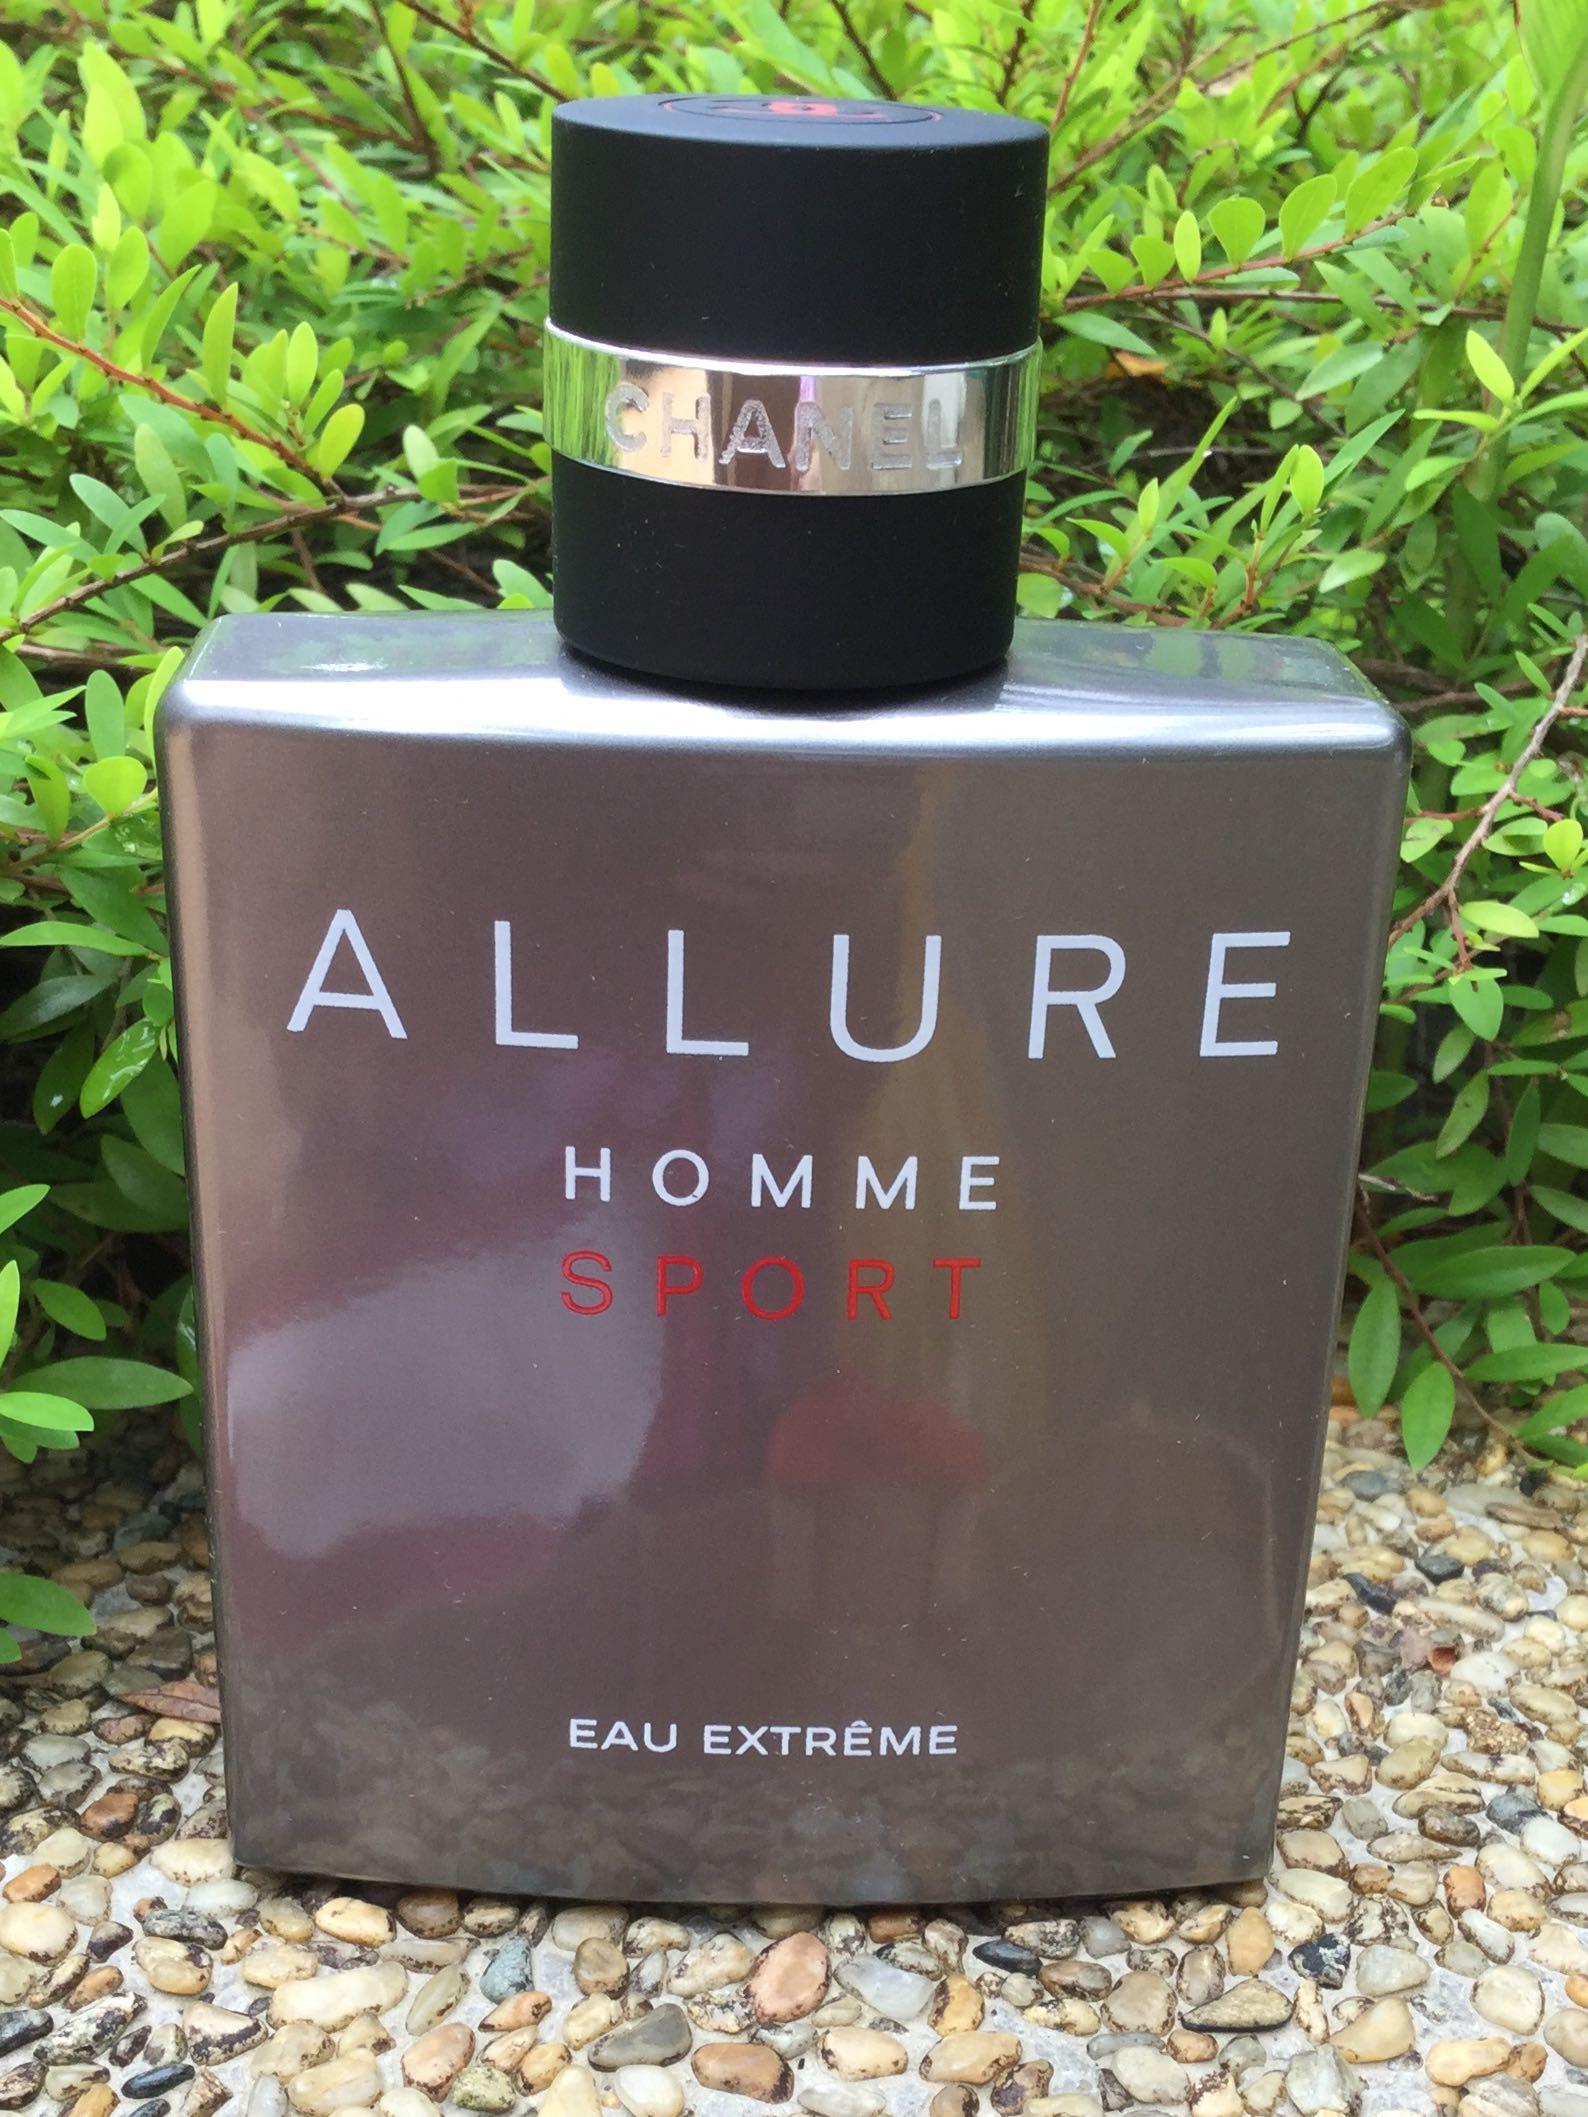 Chanel Allure Homme Sport Eau Extreme (reserv), Beauty & Personal